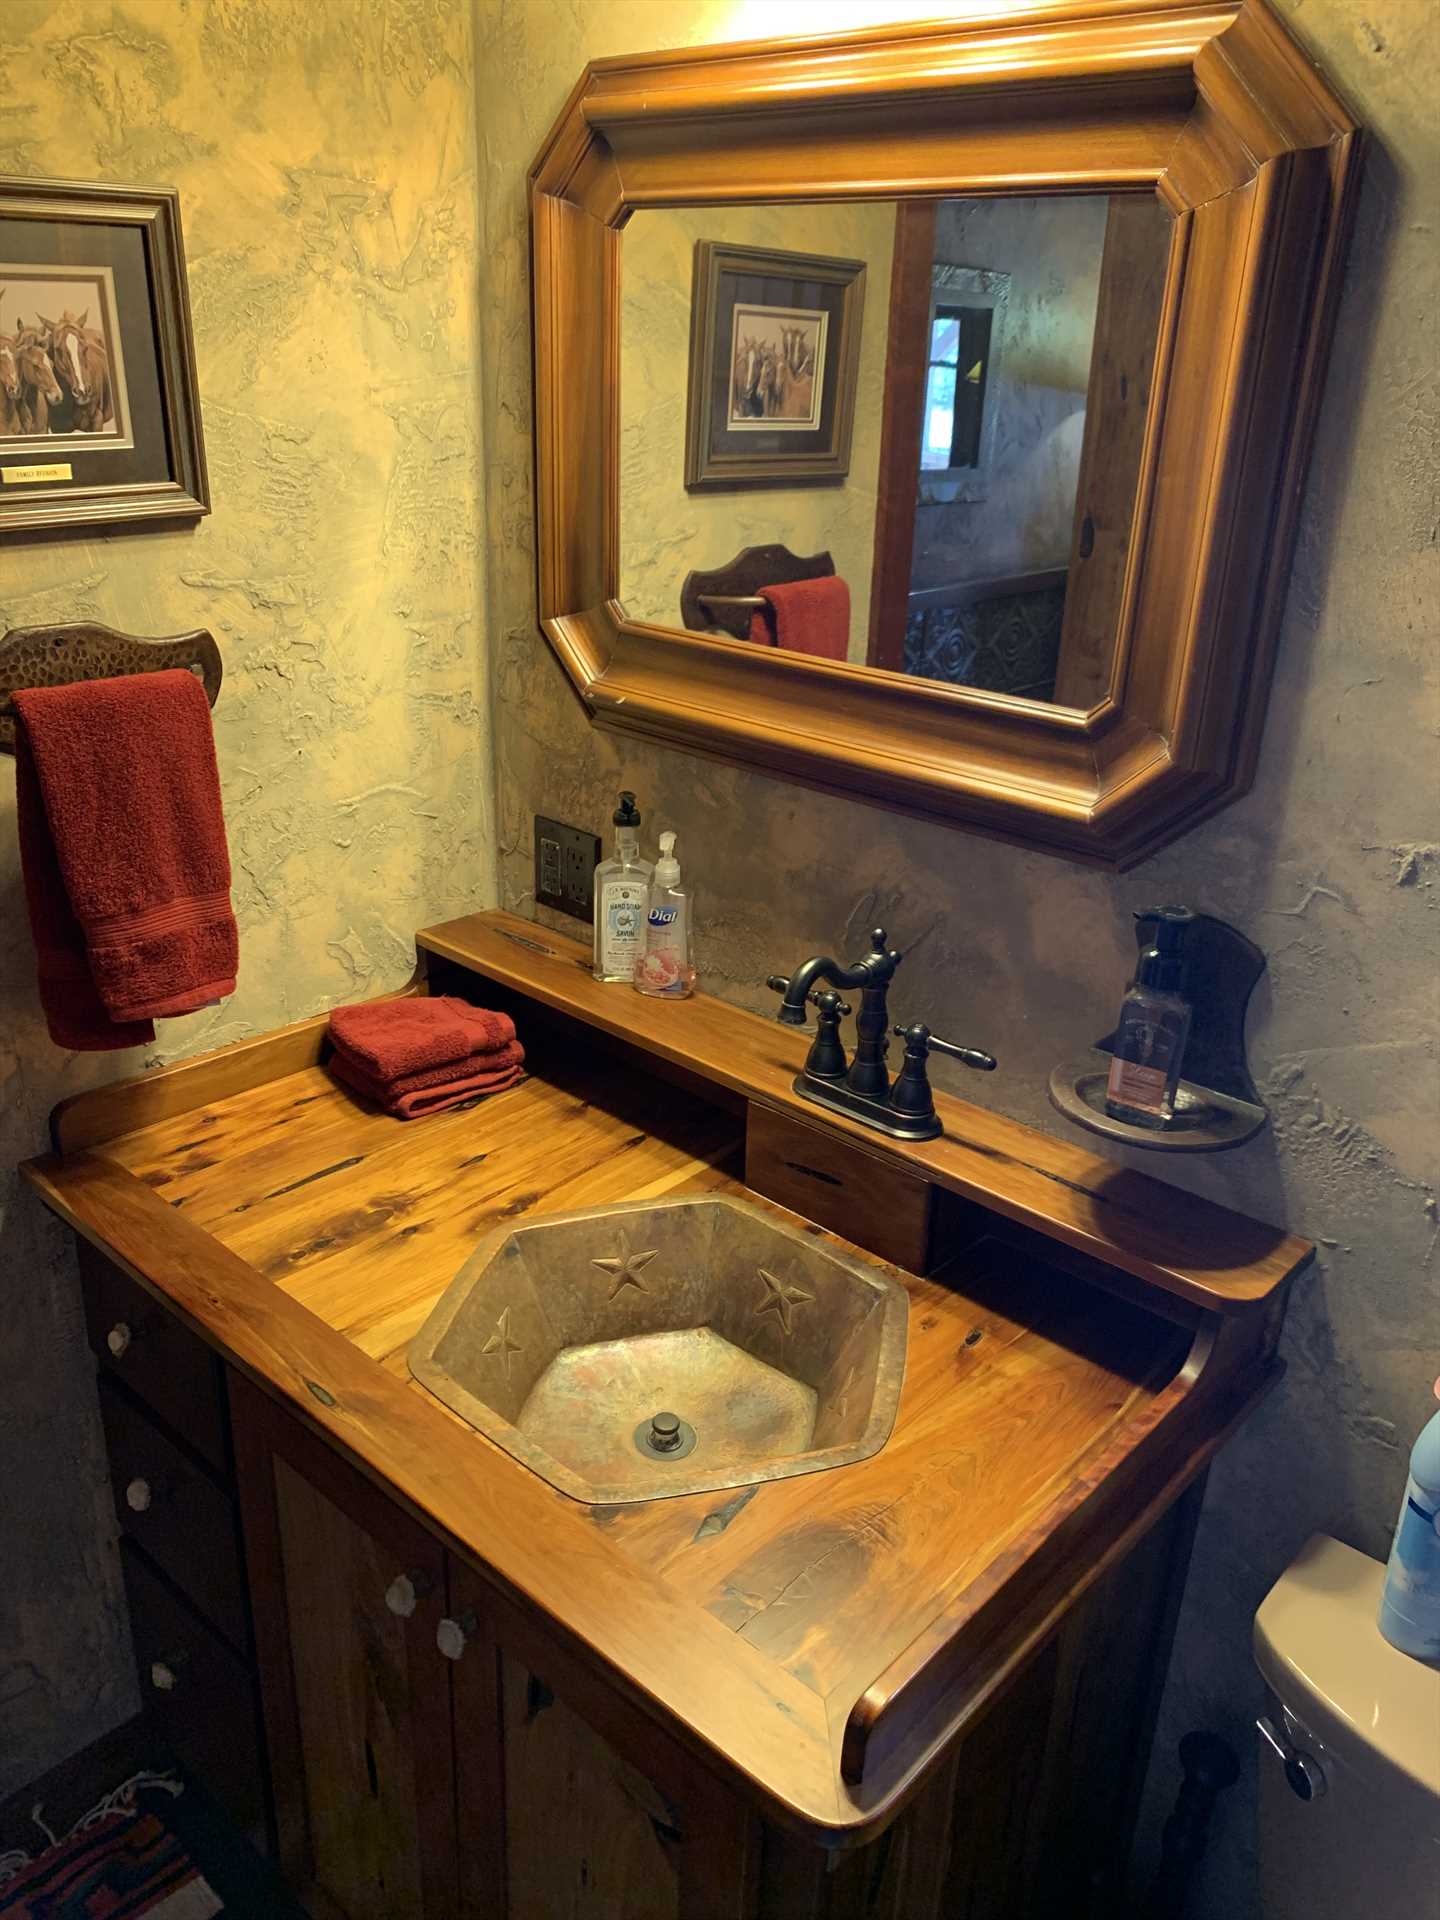                                                 Unique woodwork and geometric furnishings make even the bathroom at the Antler Cabin stand out!